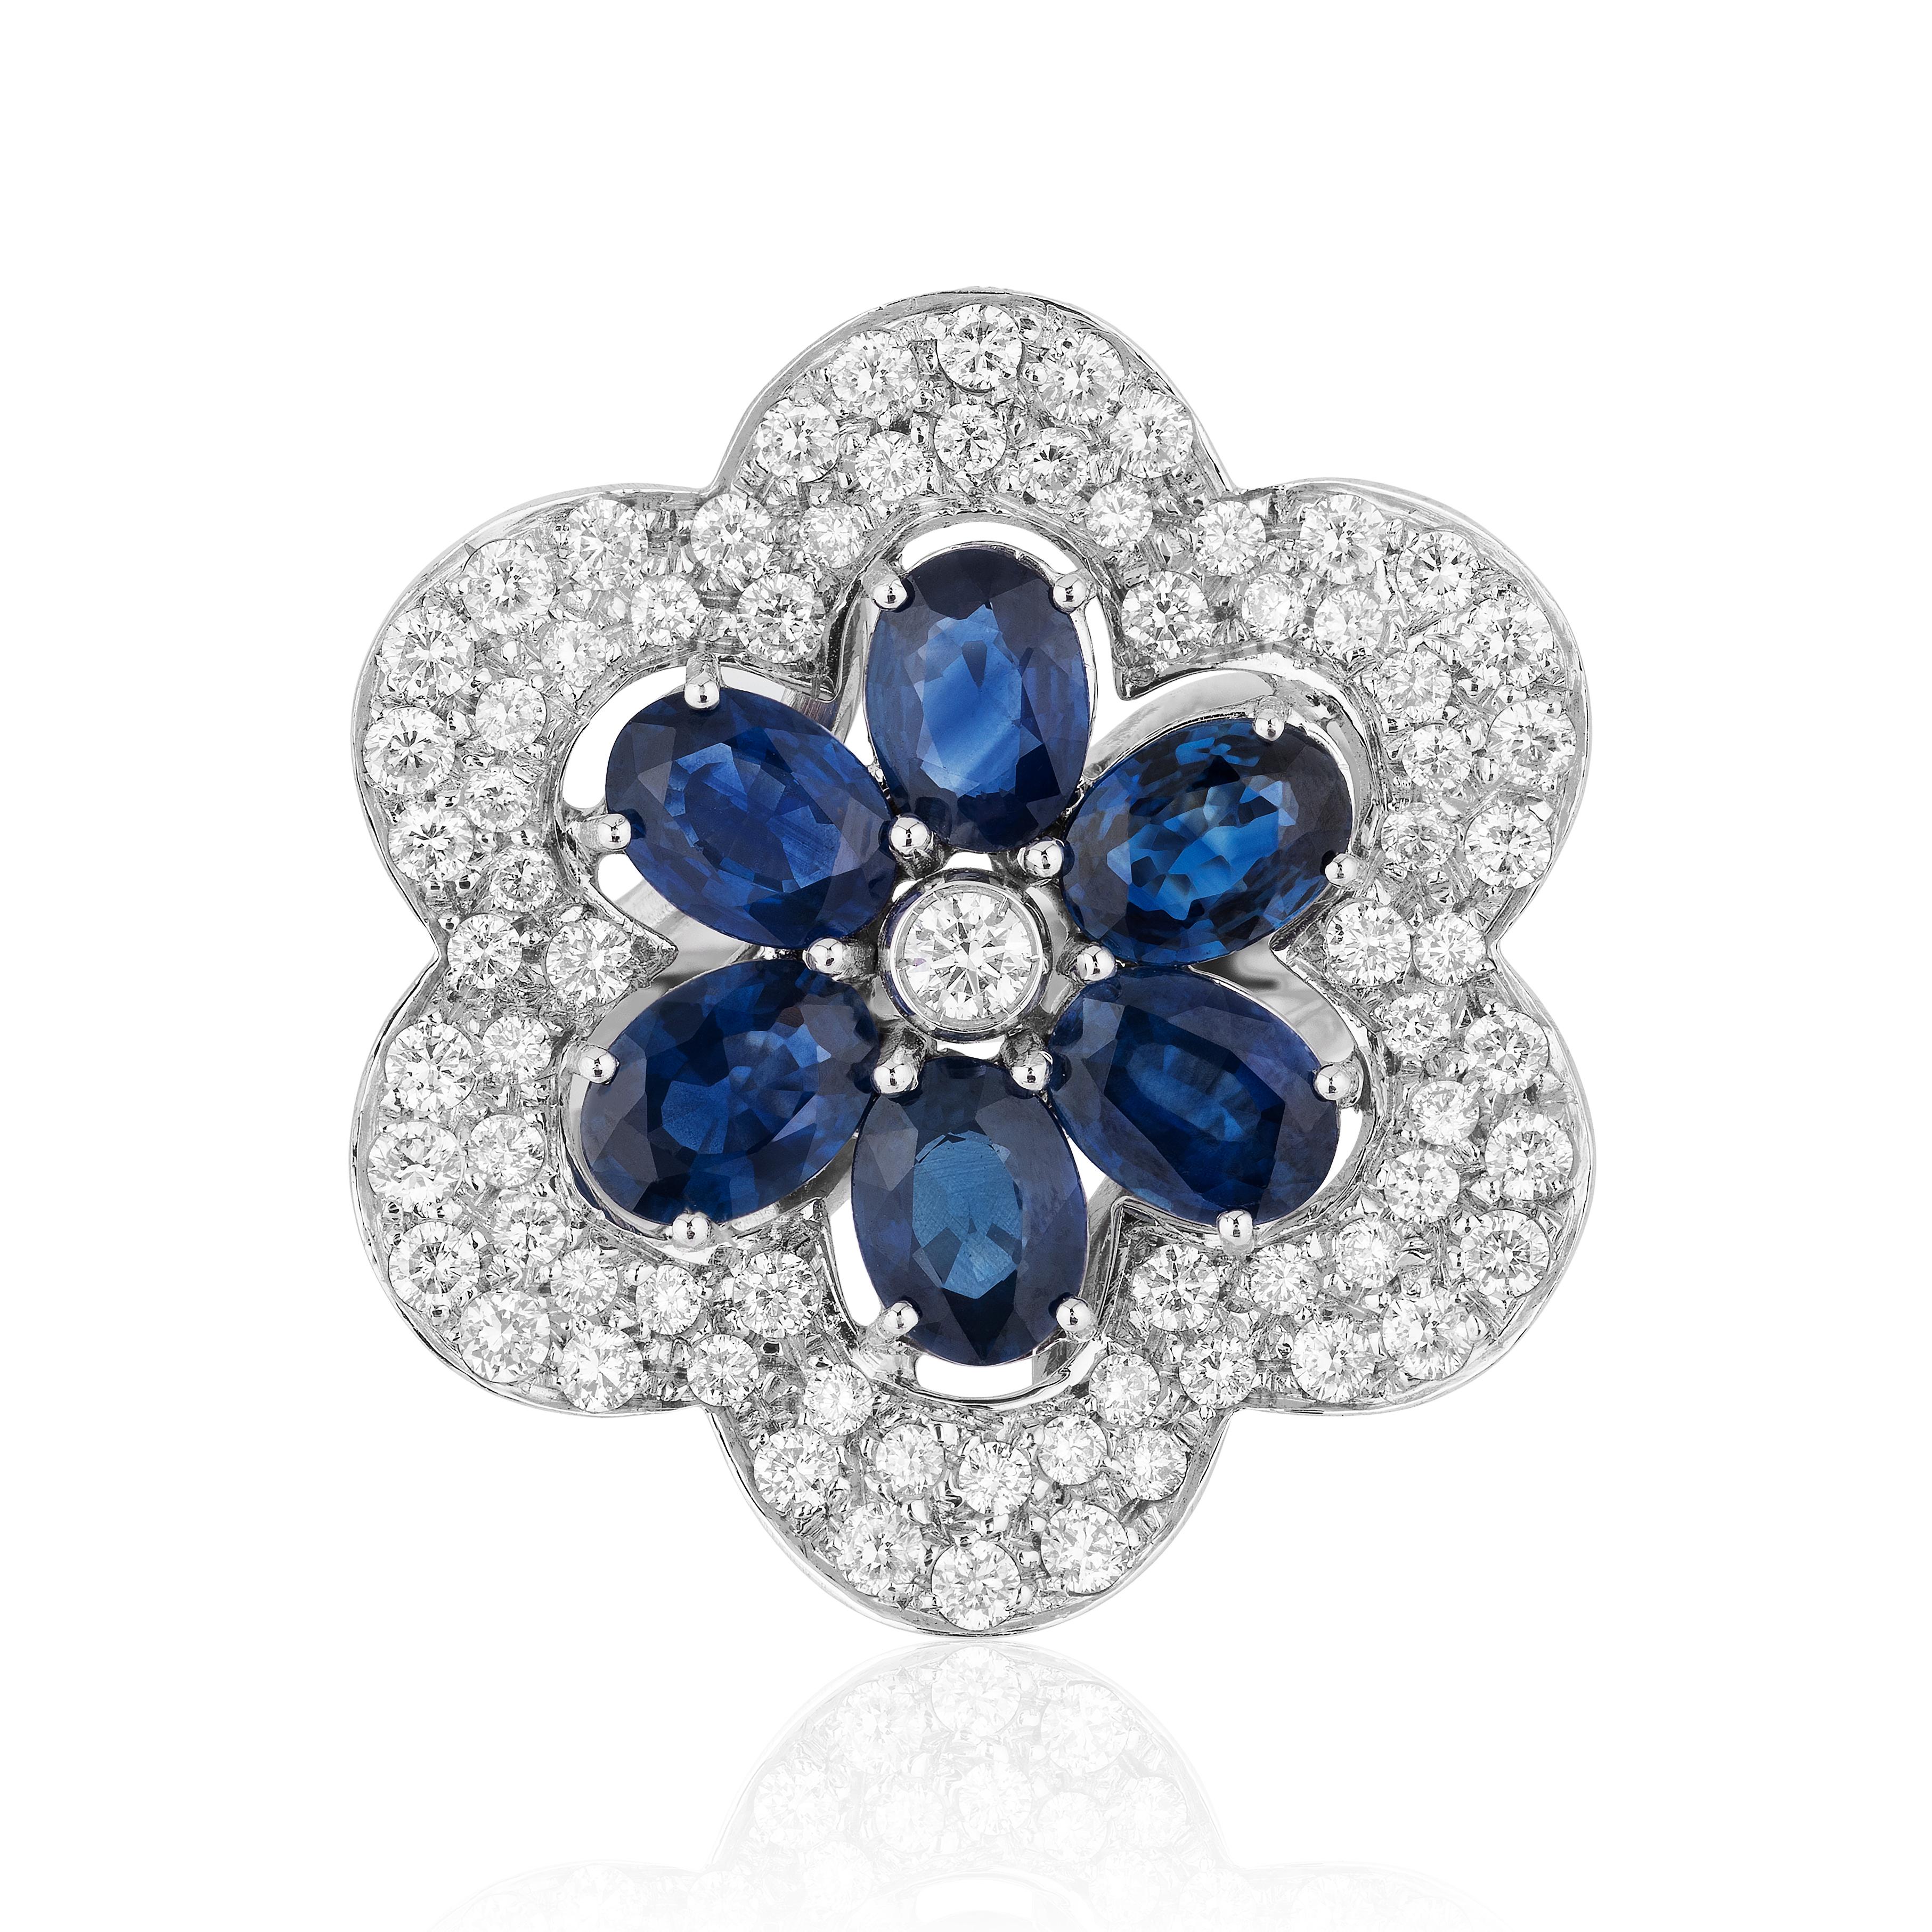 Blue Sapphire Oval and Diamond Flower Cocktail Ring in 18 Karat White Gold. This ring features Six Oval Blue Sapphires from the legendary mines of Kanchanaburi, Thailand weighing 5.42 carats surrounded with 1.86 carats of F-G-H Color VS-SI Clarity